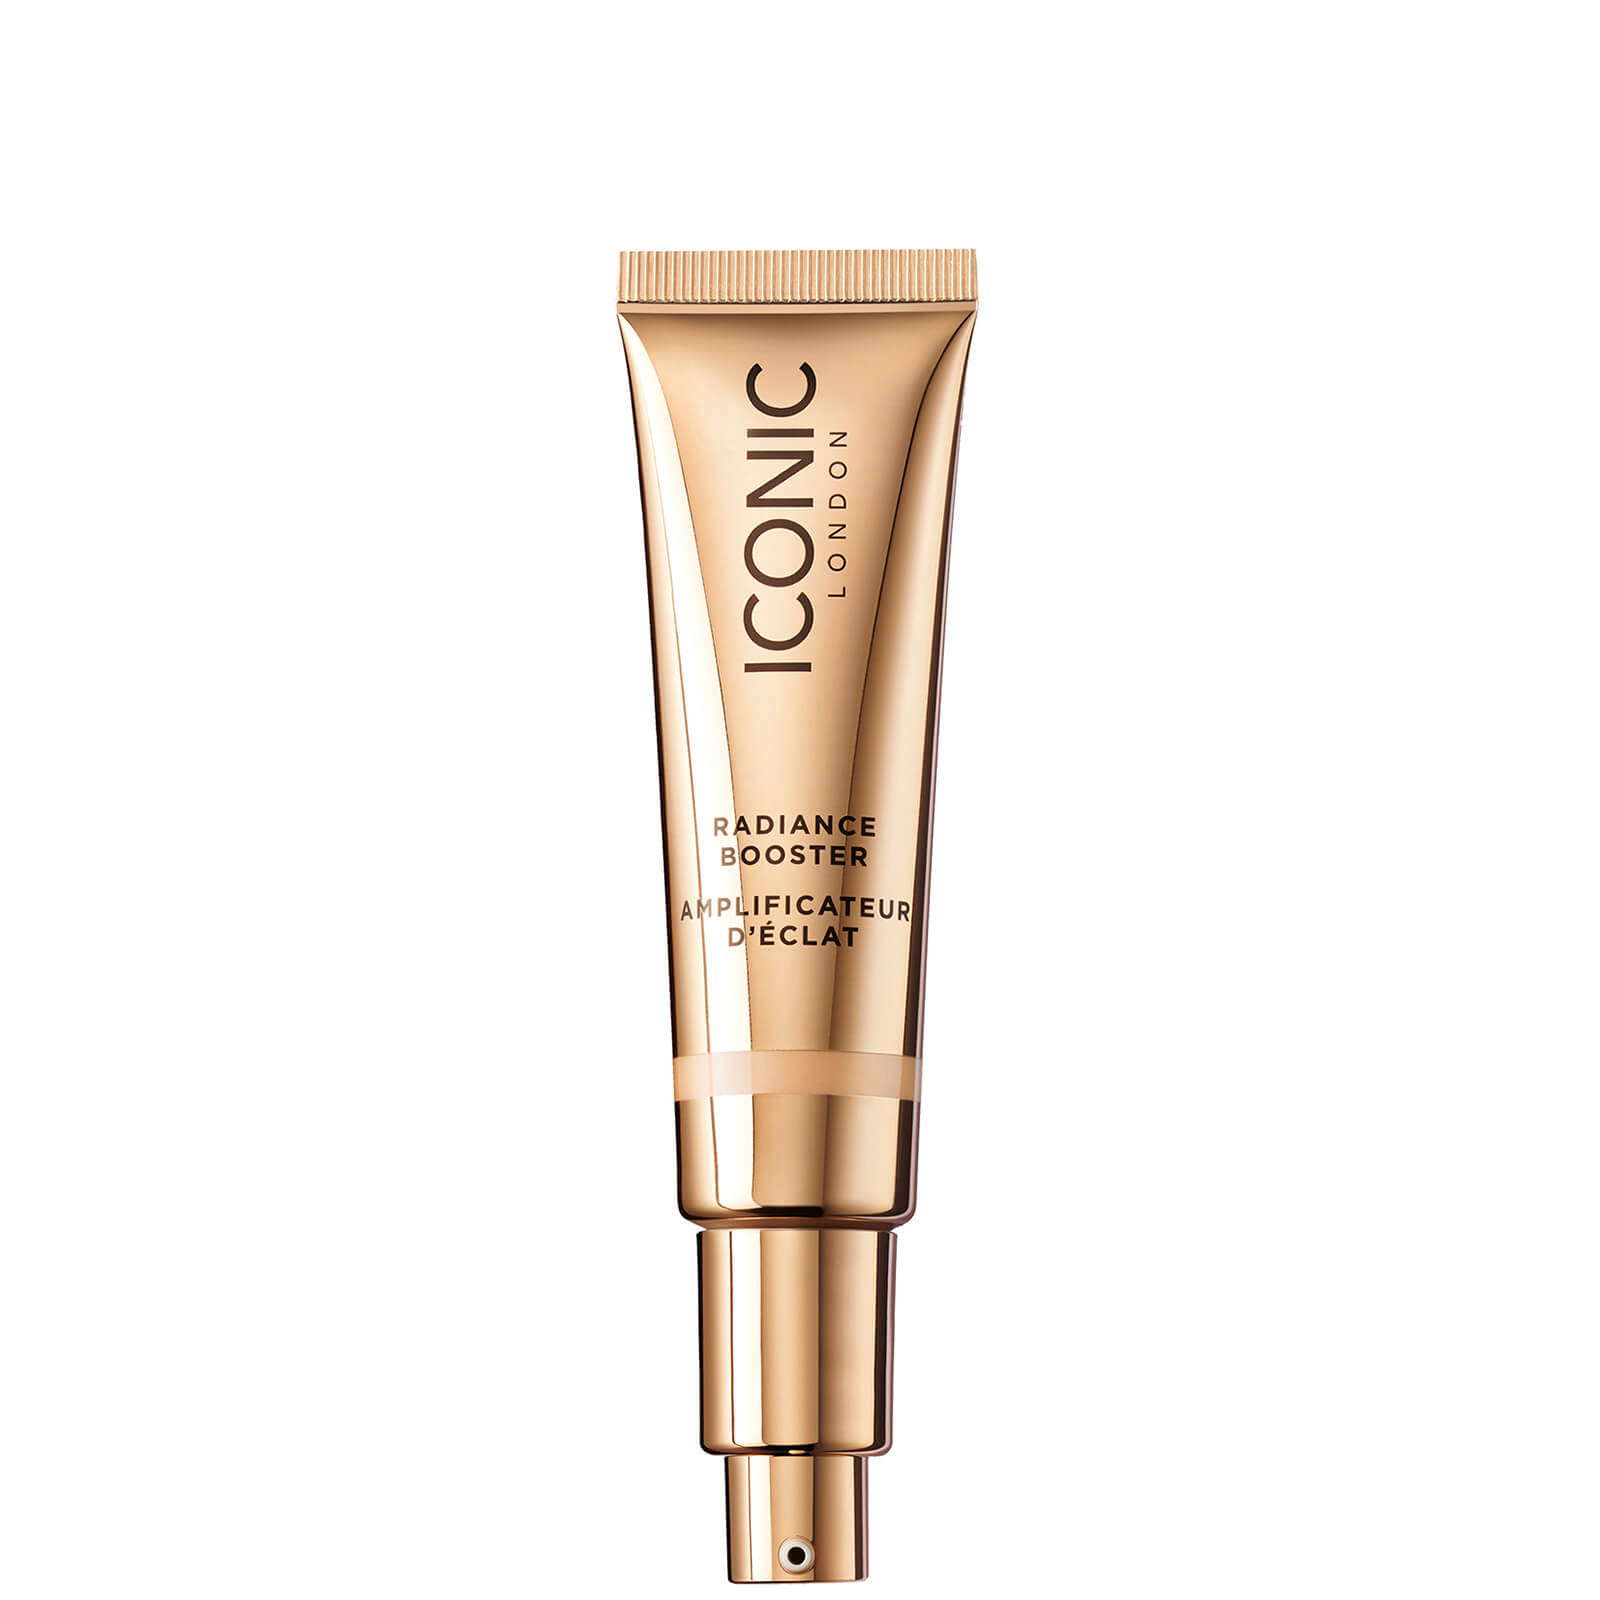 Image of Booster London Radiance ICONIC 30ml (varie tonalità) - Shell Glow